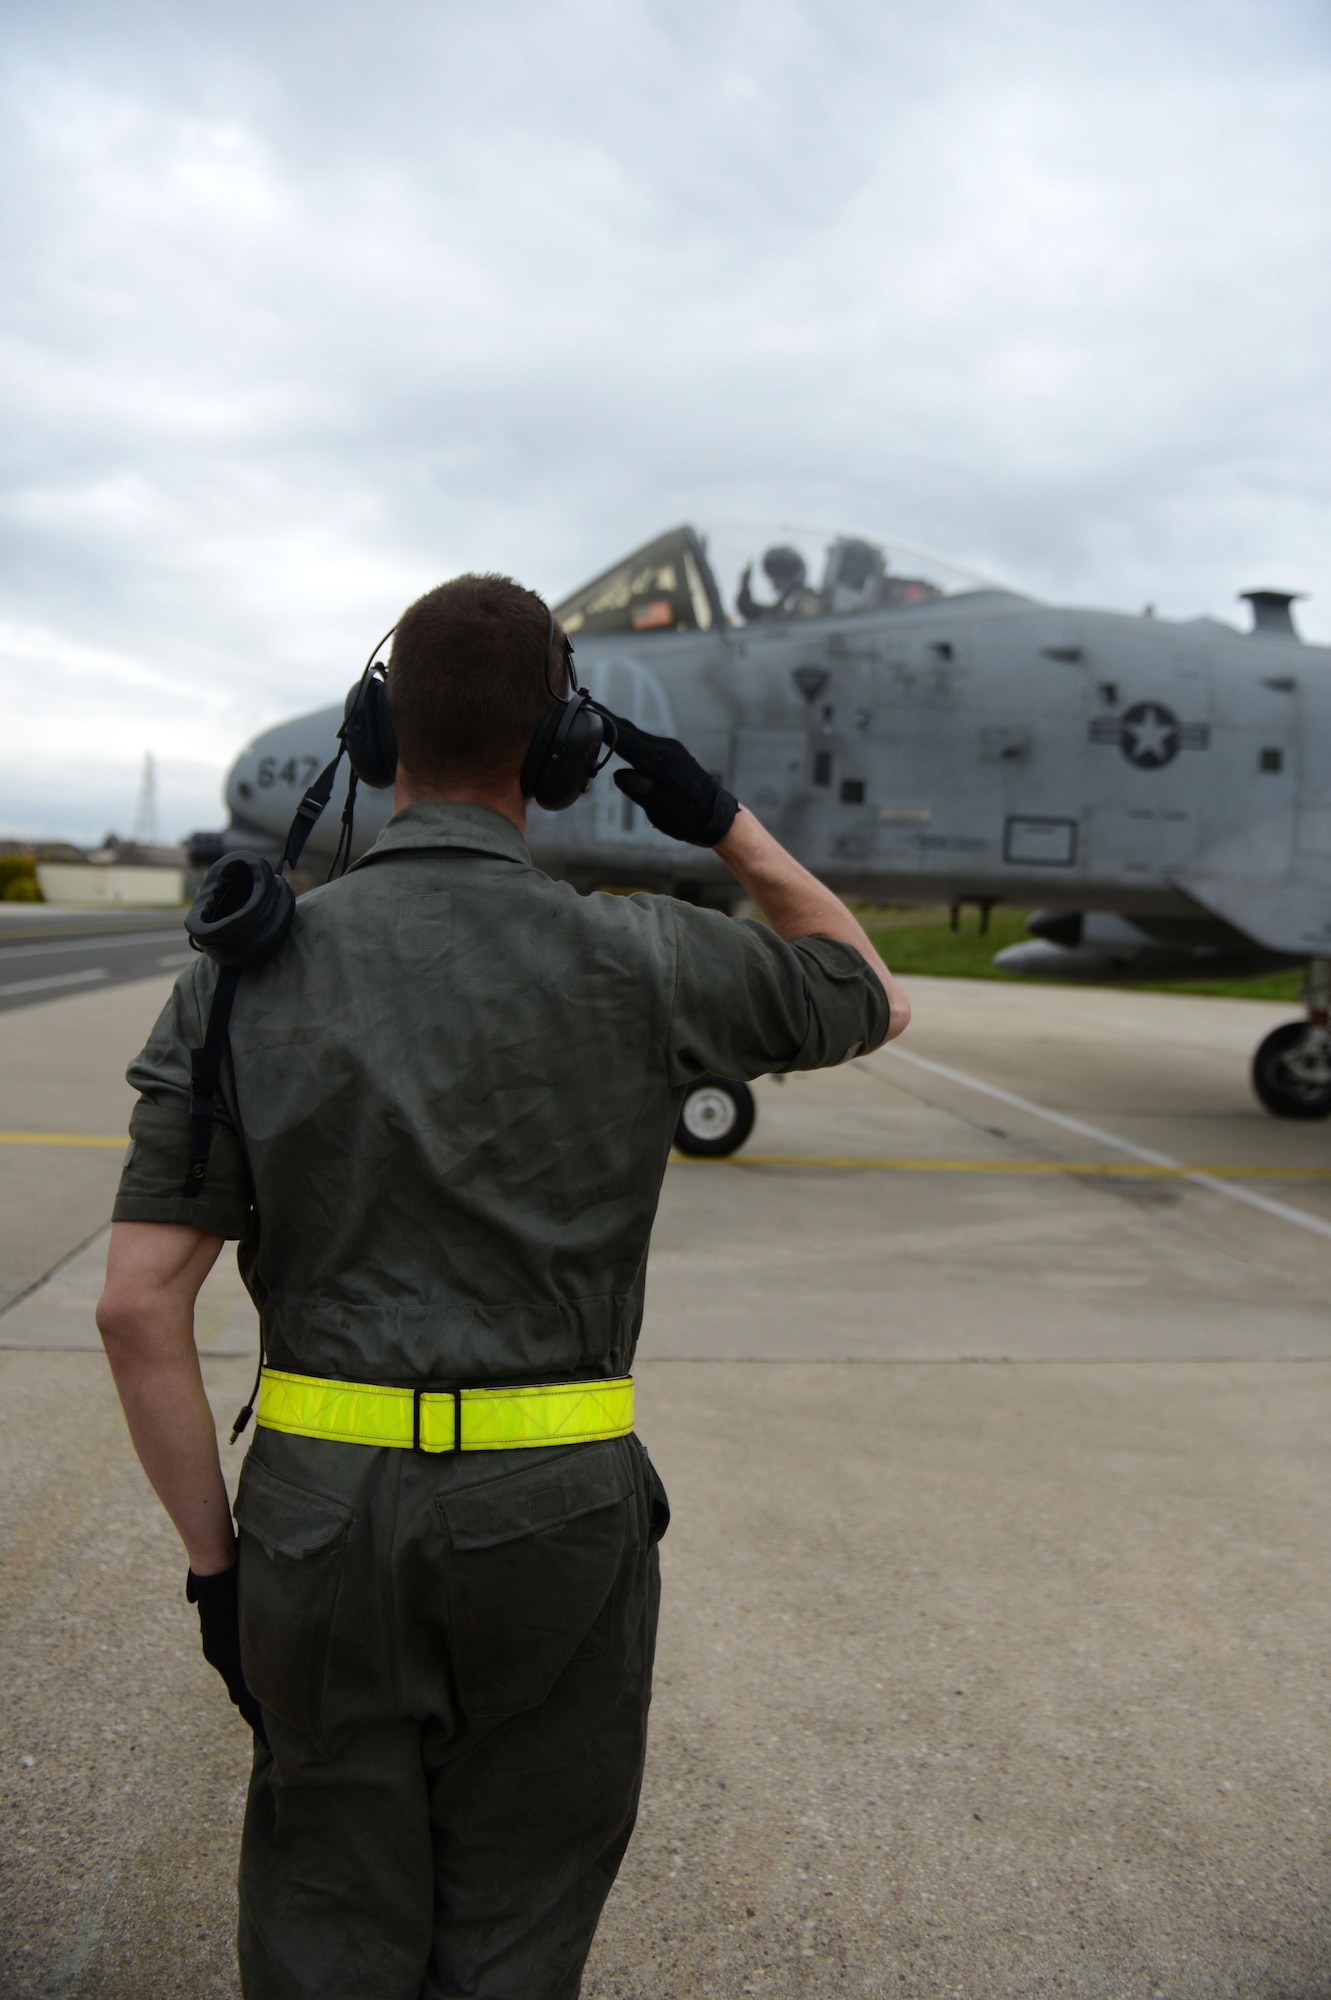 SPANGDAHLEM AIR BASE, Germany – U.S. Air Force Airman 1st Class Ethan Du Barton, 52nd Aircraft Maintenance Squadron crew chief from Kingman, Ariz., salutes U.S. Air Force Capt. Gregory Ulrich, 81st Fighter Squadron pilot from Fairfield, Calif. as he takes part in the final A-10 Thunderbolt II tactical sortie May 14, 2013. Flying hours across the Air Force are being reduced; however, pilots strive to maintain their proficiency by training at every opportunity. (U.S. Air Force photo by Airman 1st Class Gustavo Castillo/Released)